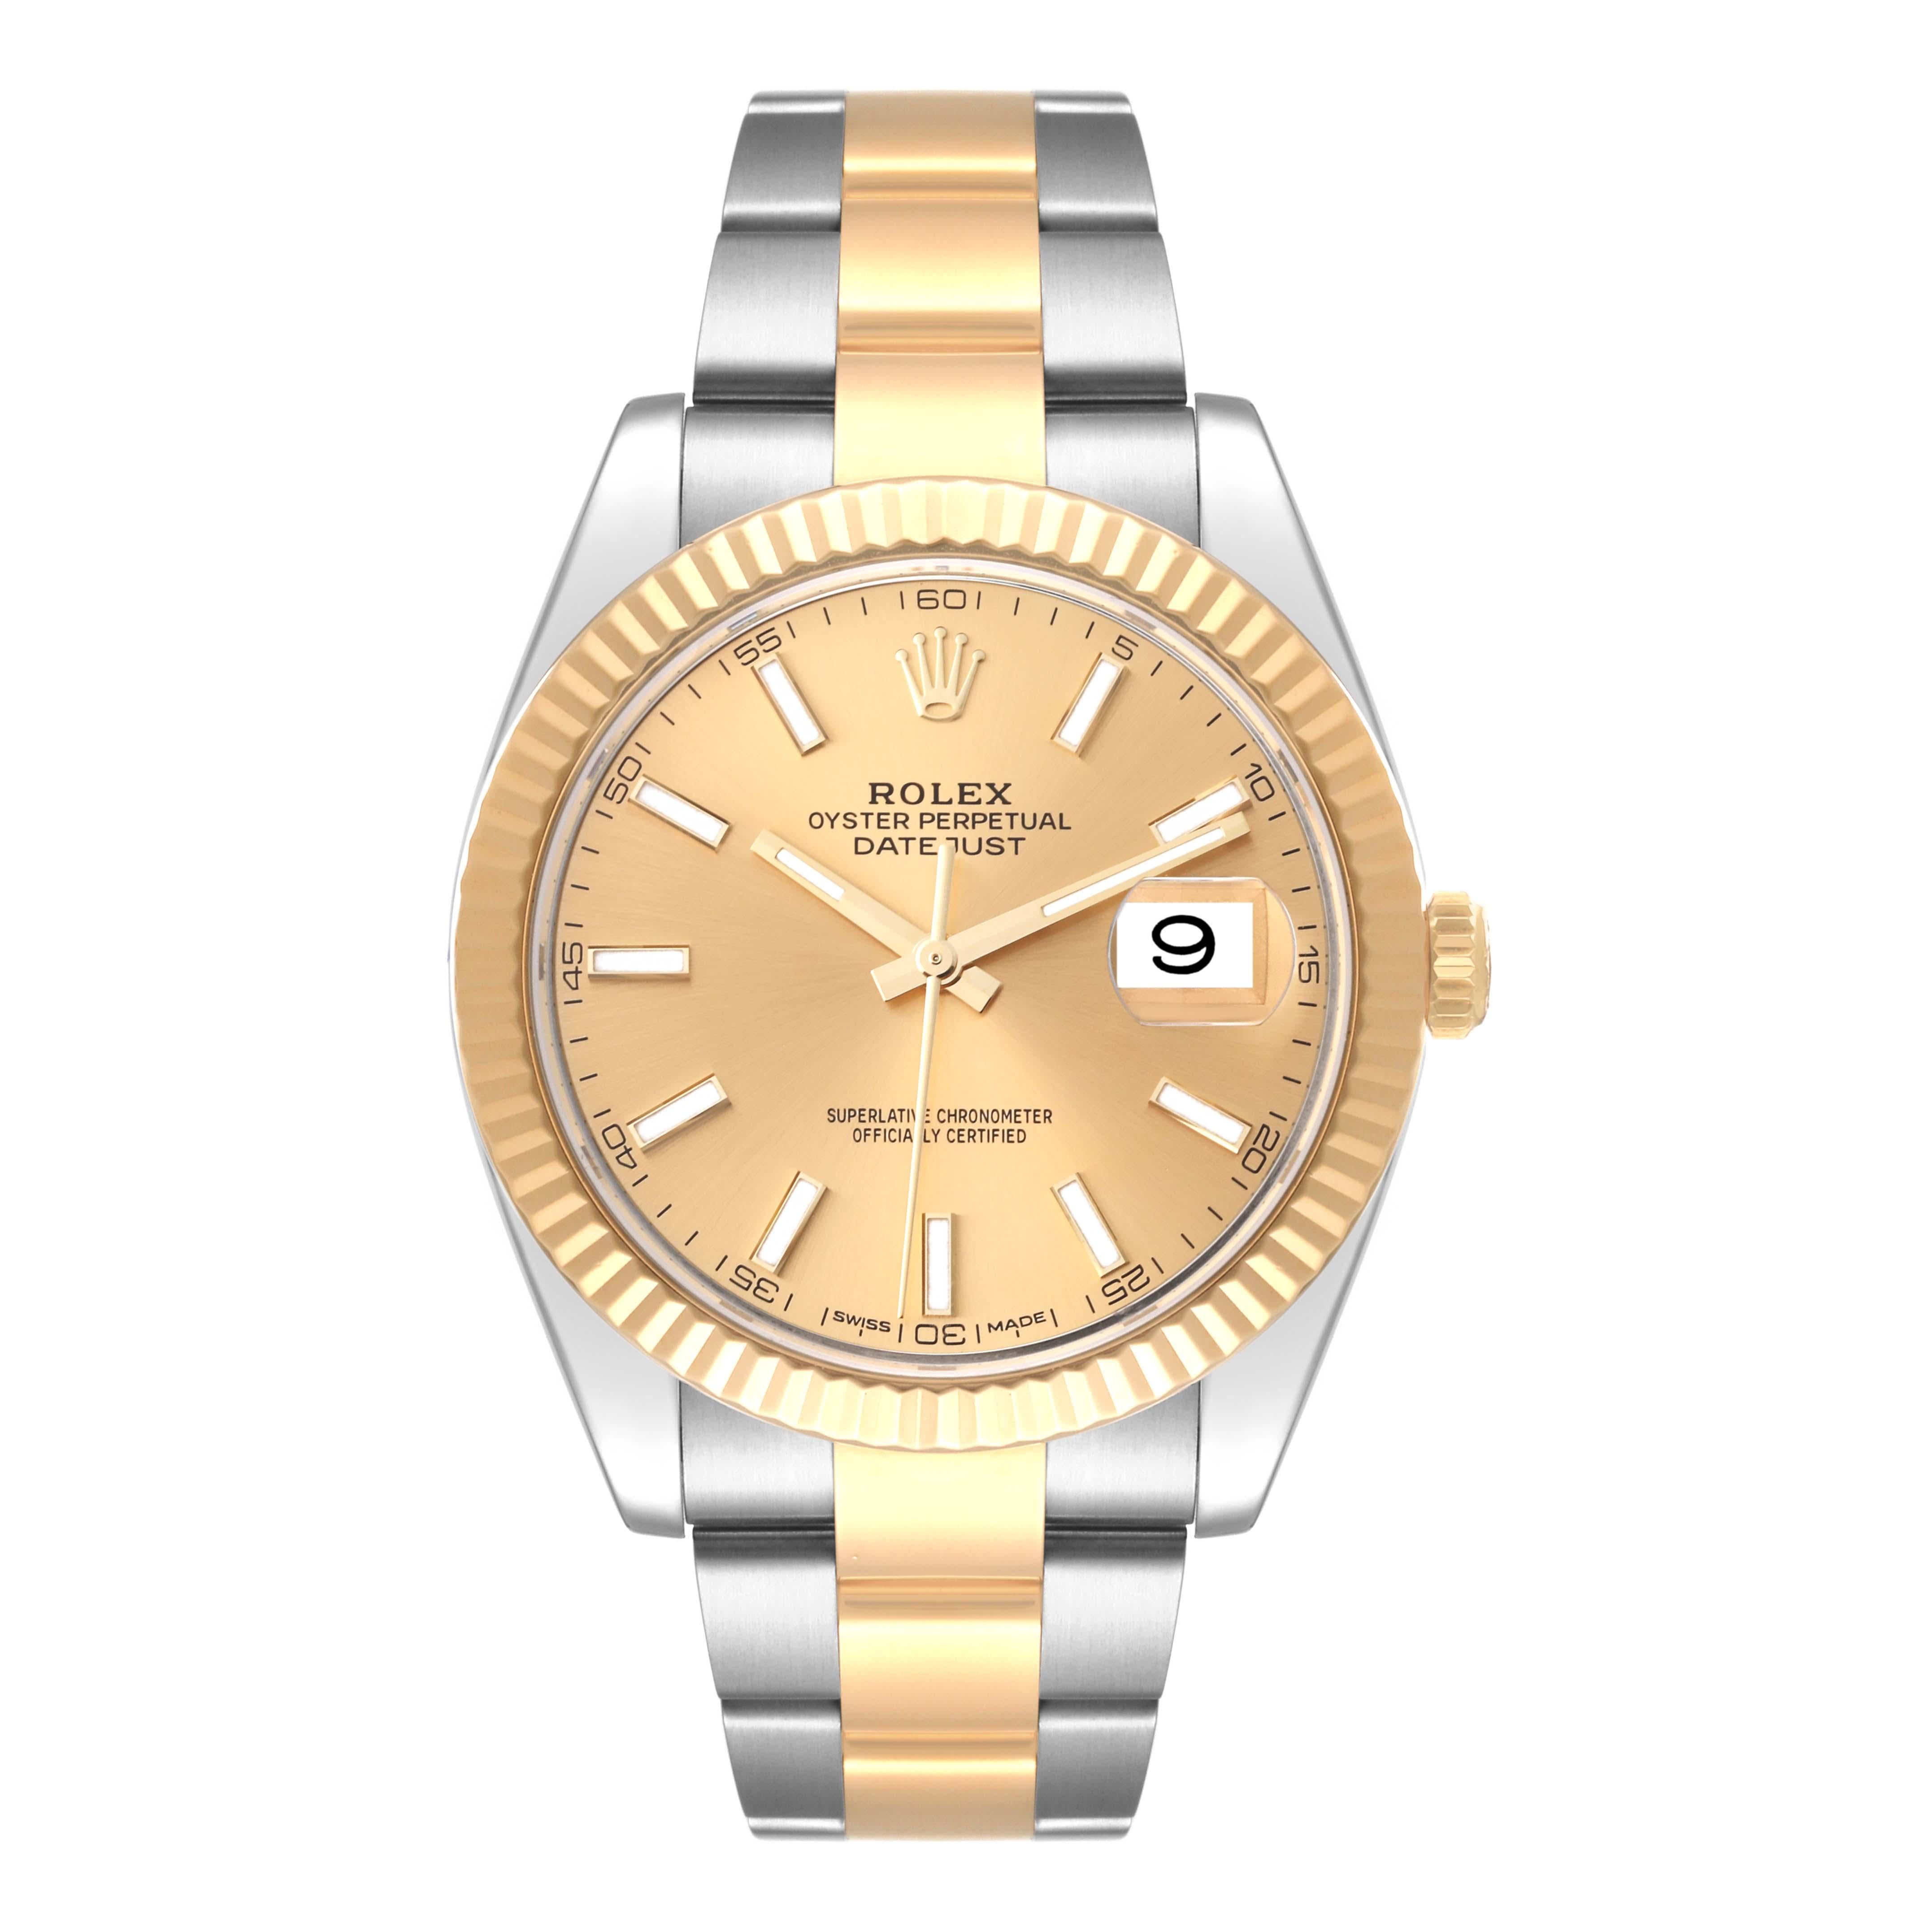 Rolex Datejust 41 Steel Yellow Gold Champagne Dial Mens Watch 126333. Officially certified chronometer self-winding movement with quickset date. Stainless steel and 18K yellow gold case 41 mm in diameter. High polished lugs. Rolex logo on a crown.